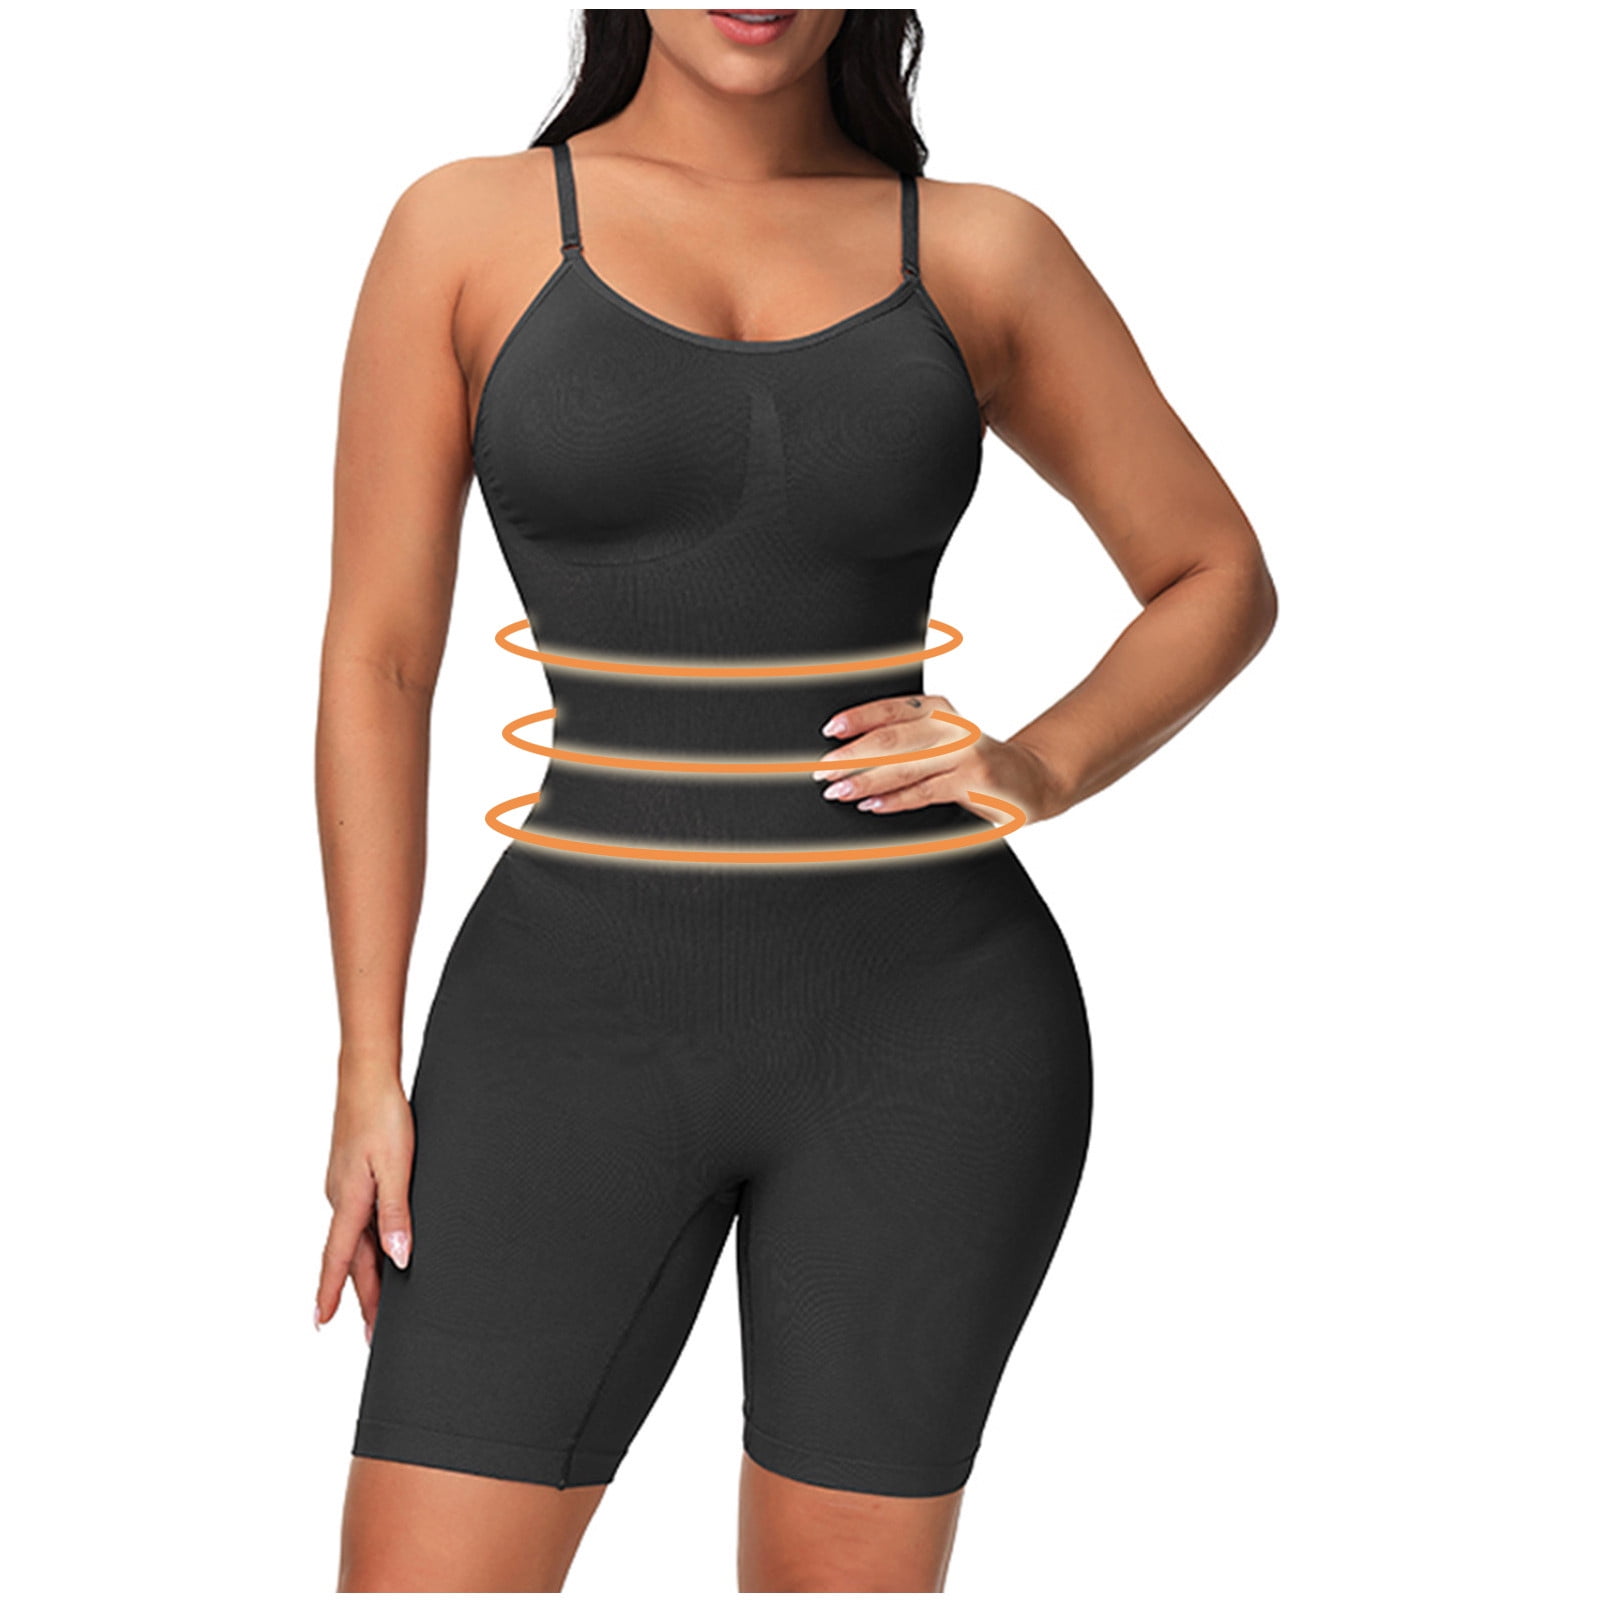 TIMIFIS Ladies Seamless One-Piece Body Shaper Abdominal Lifter Hip Shaper  Underwear Stretch Slimming Body Corset - Summer Savings Clearance